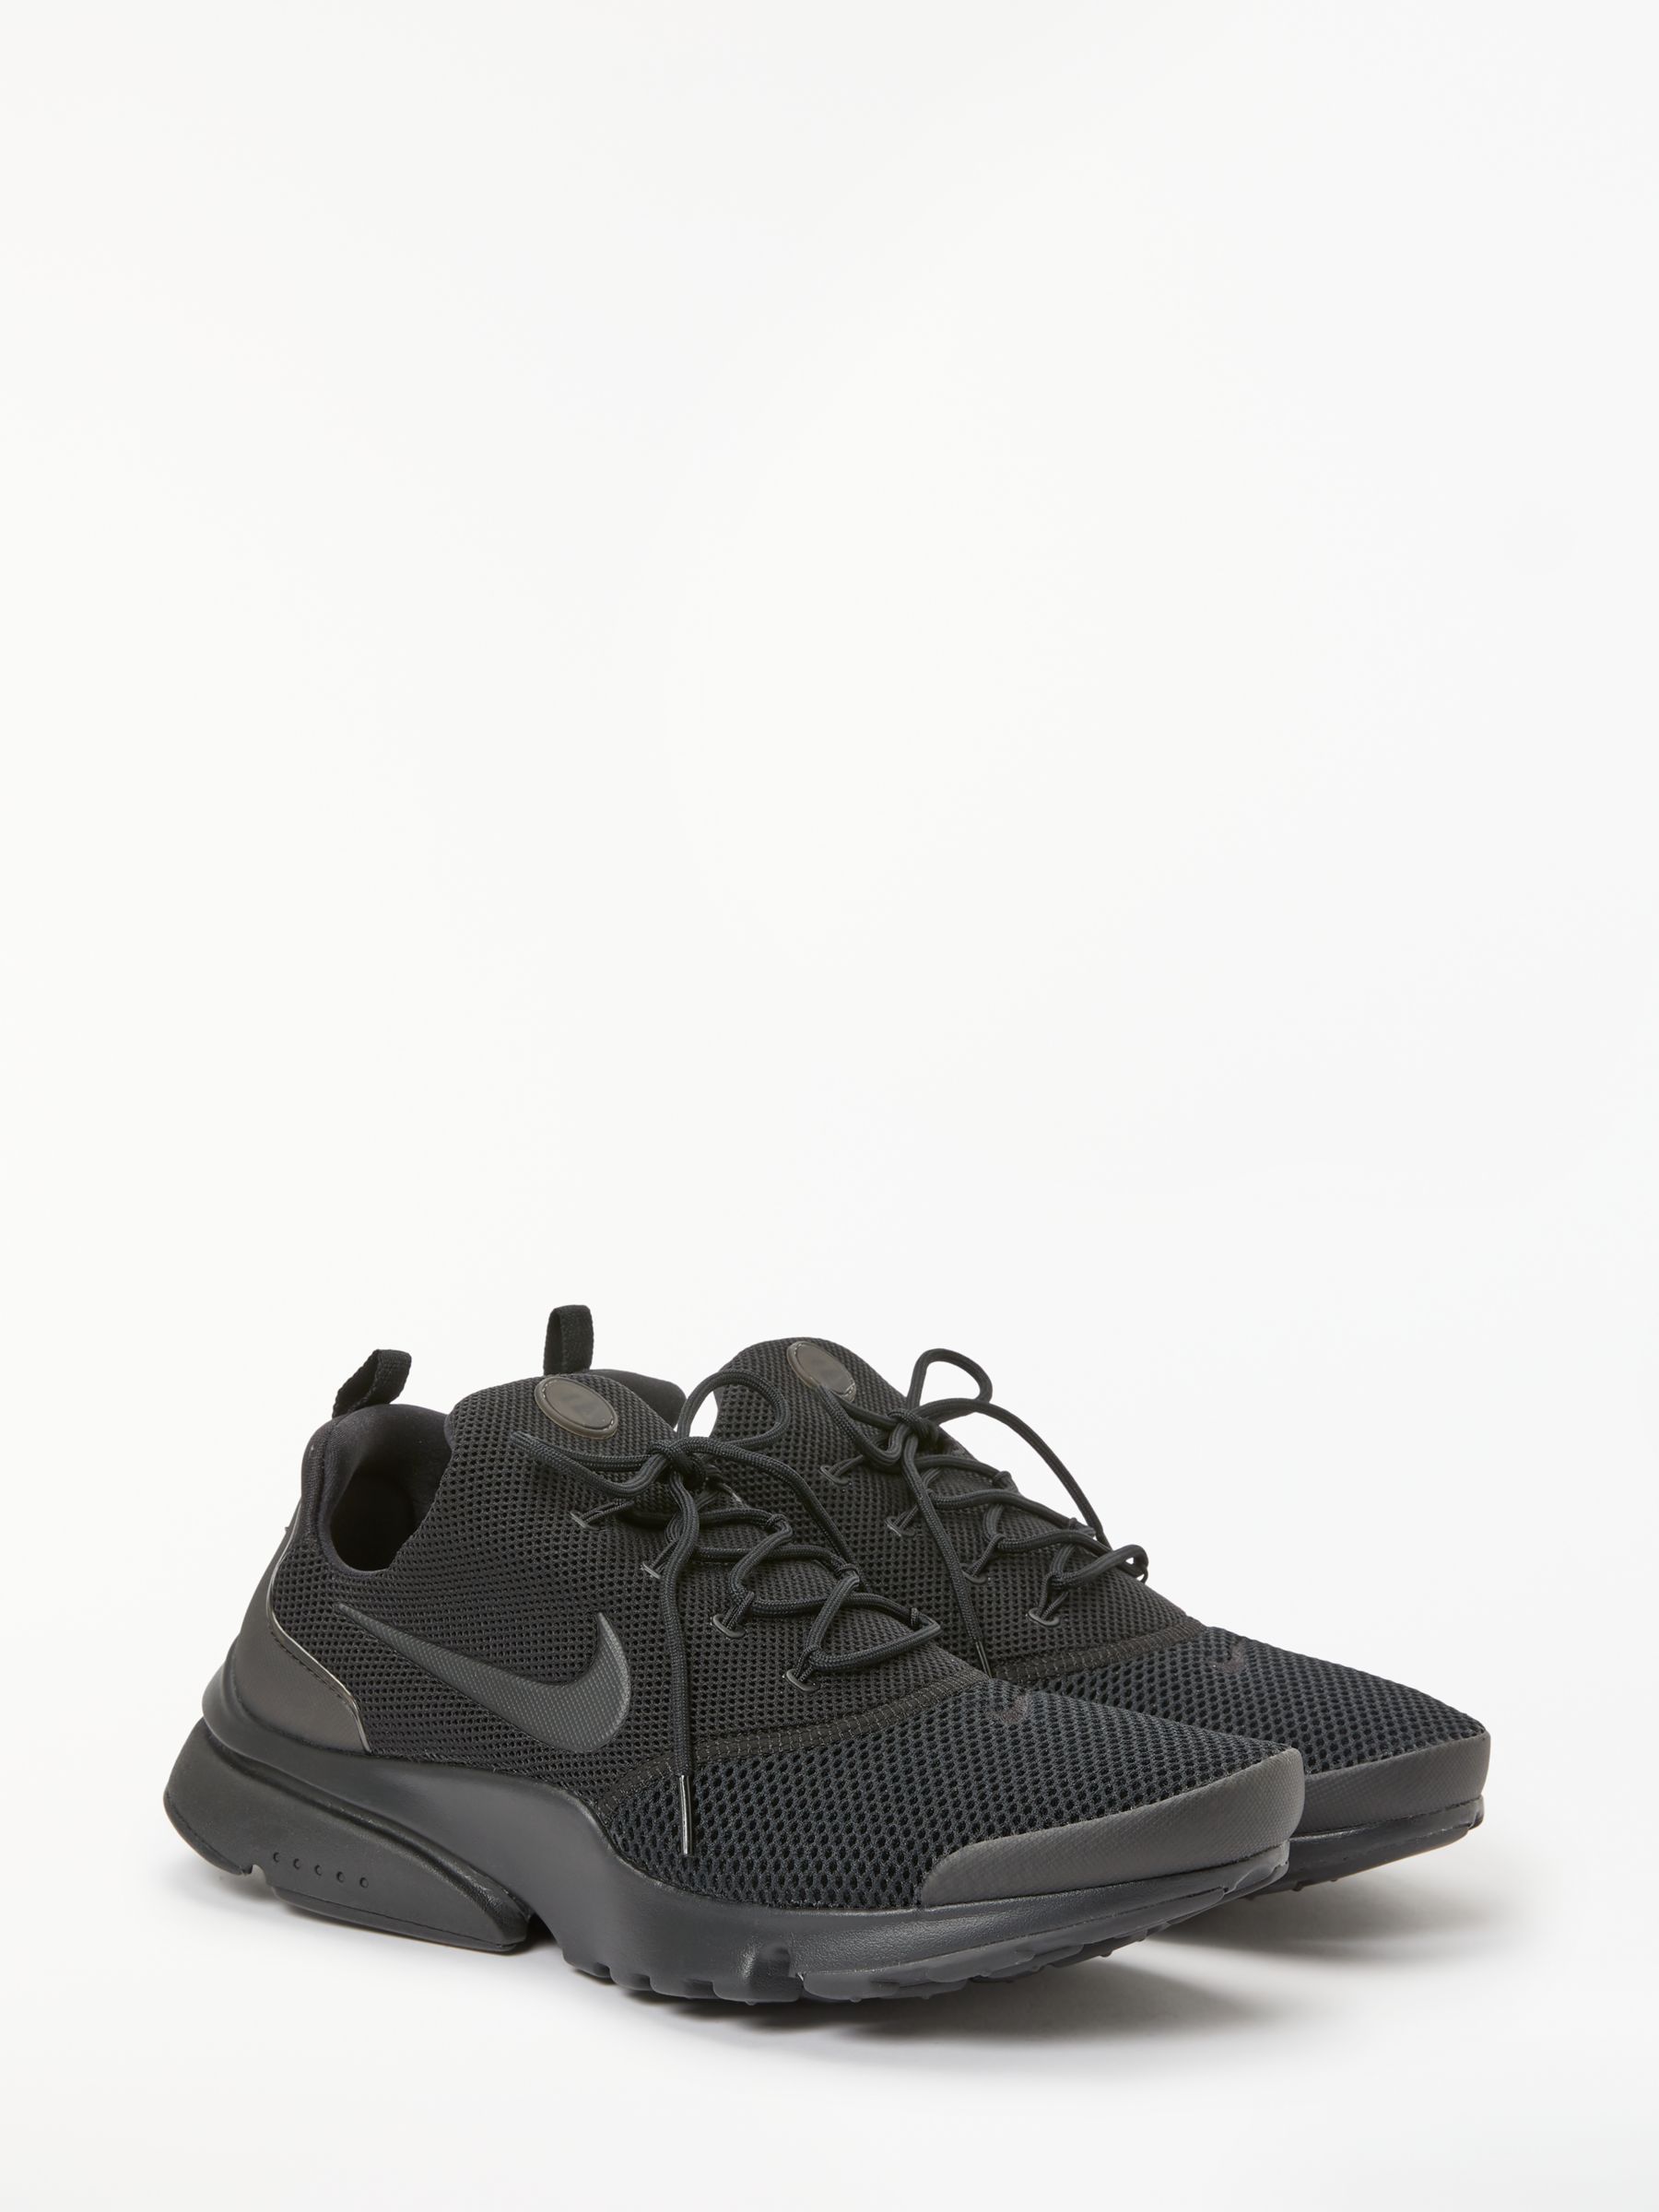 nike presto fly trainers mens